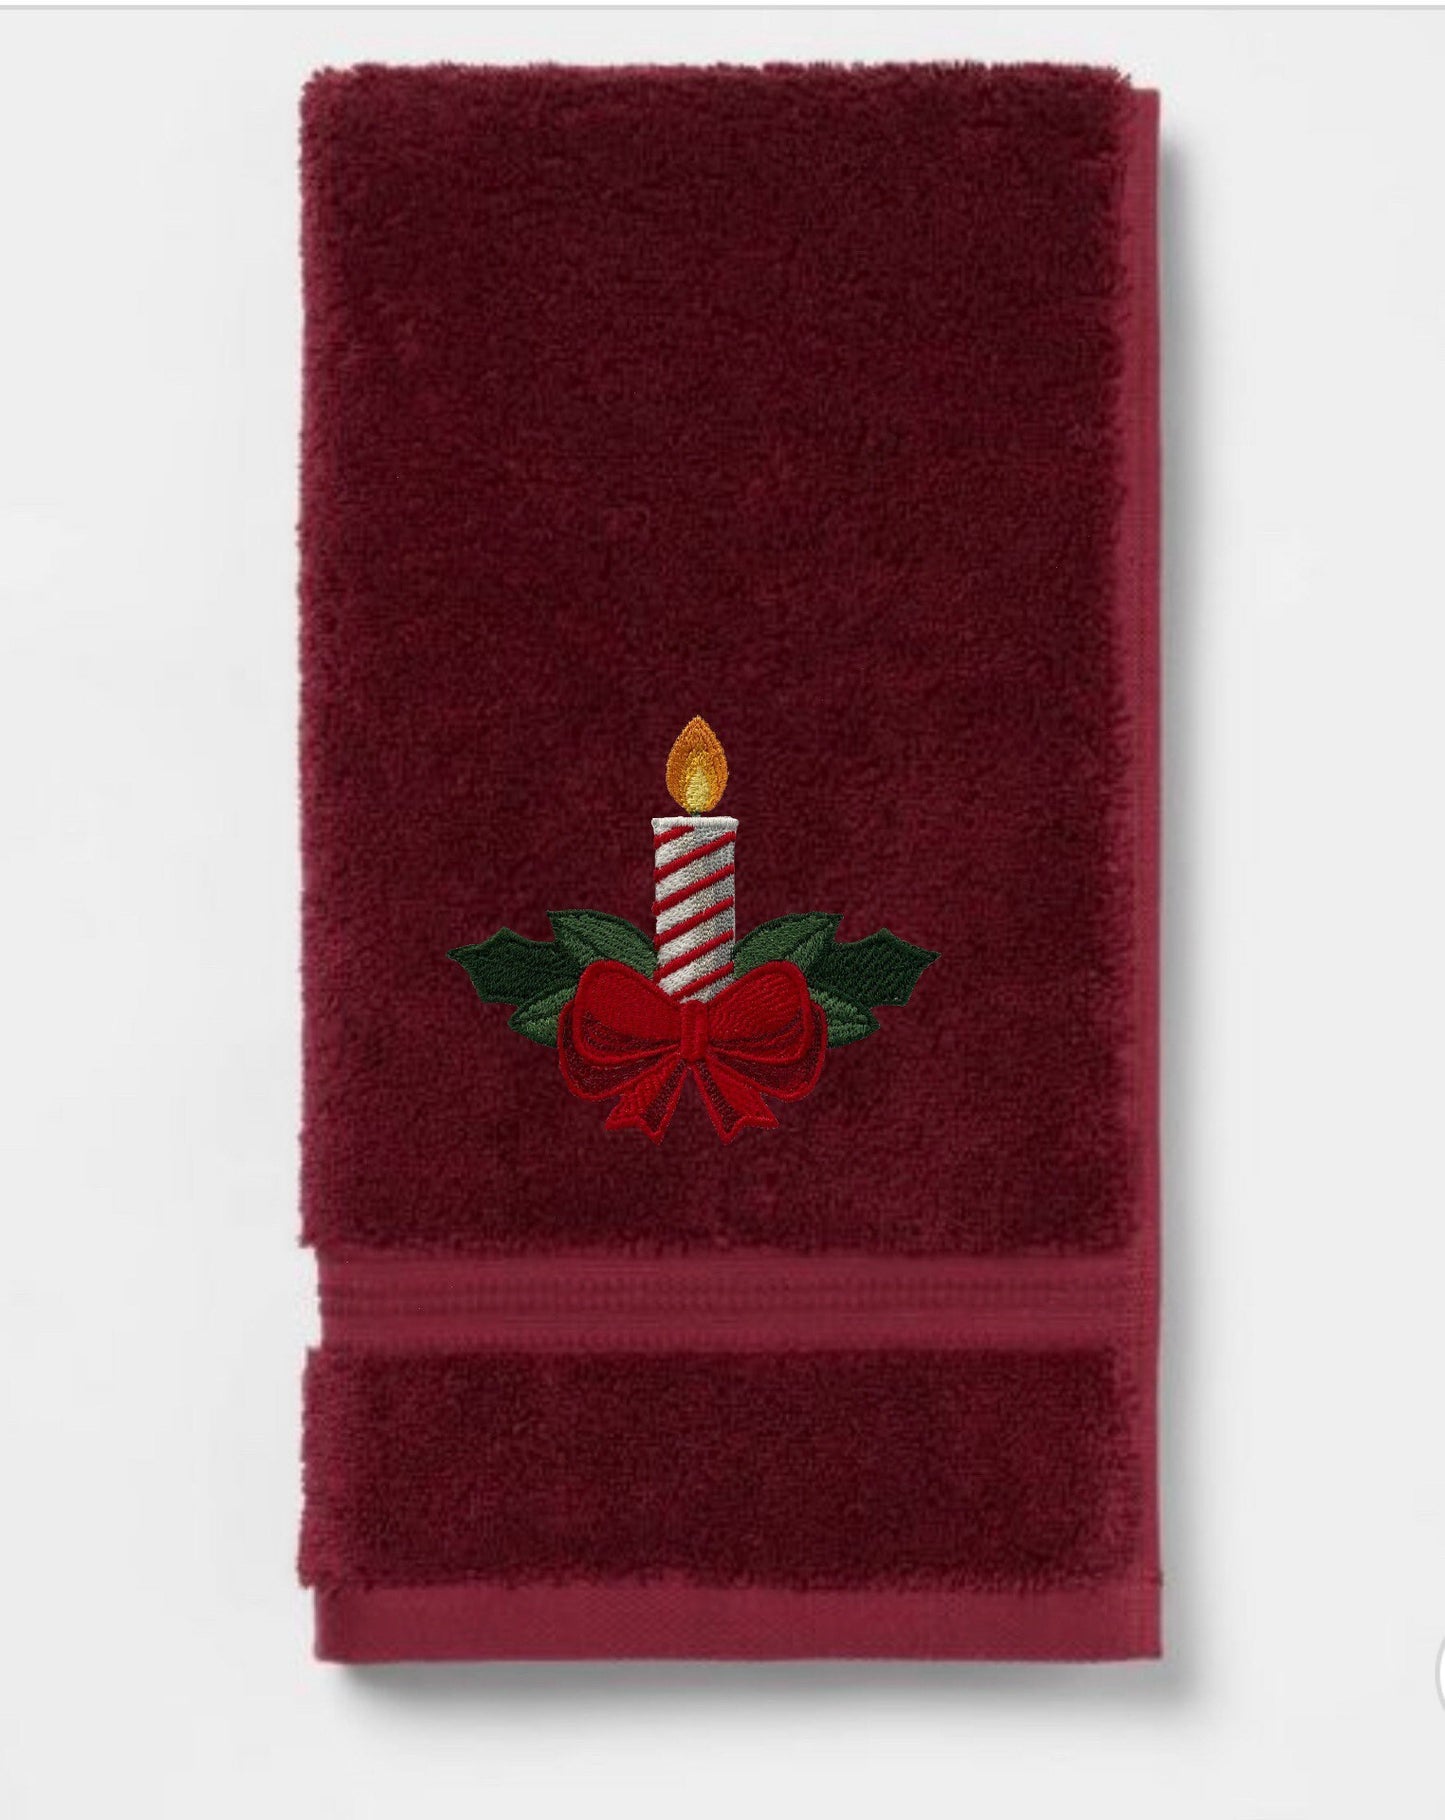 Embroidered Winter Christmas Candle Bath Towels. 100% Plush Cotton Hand or Fingertip Towel